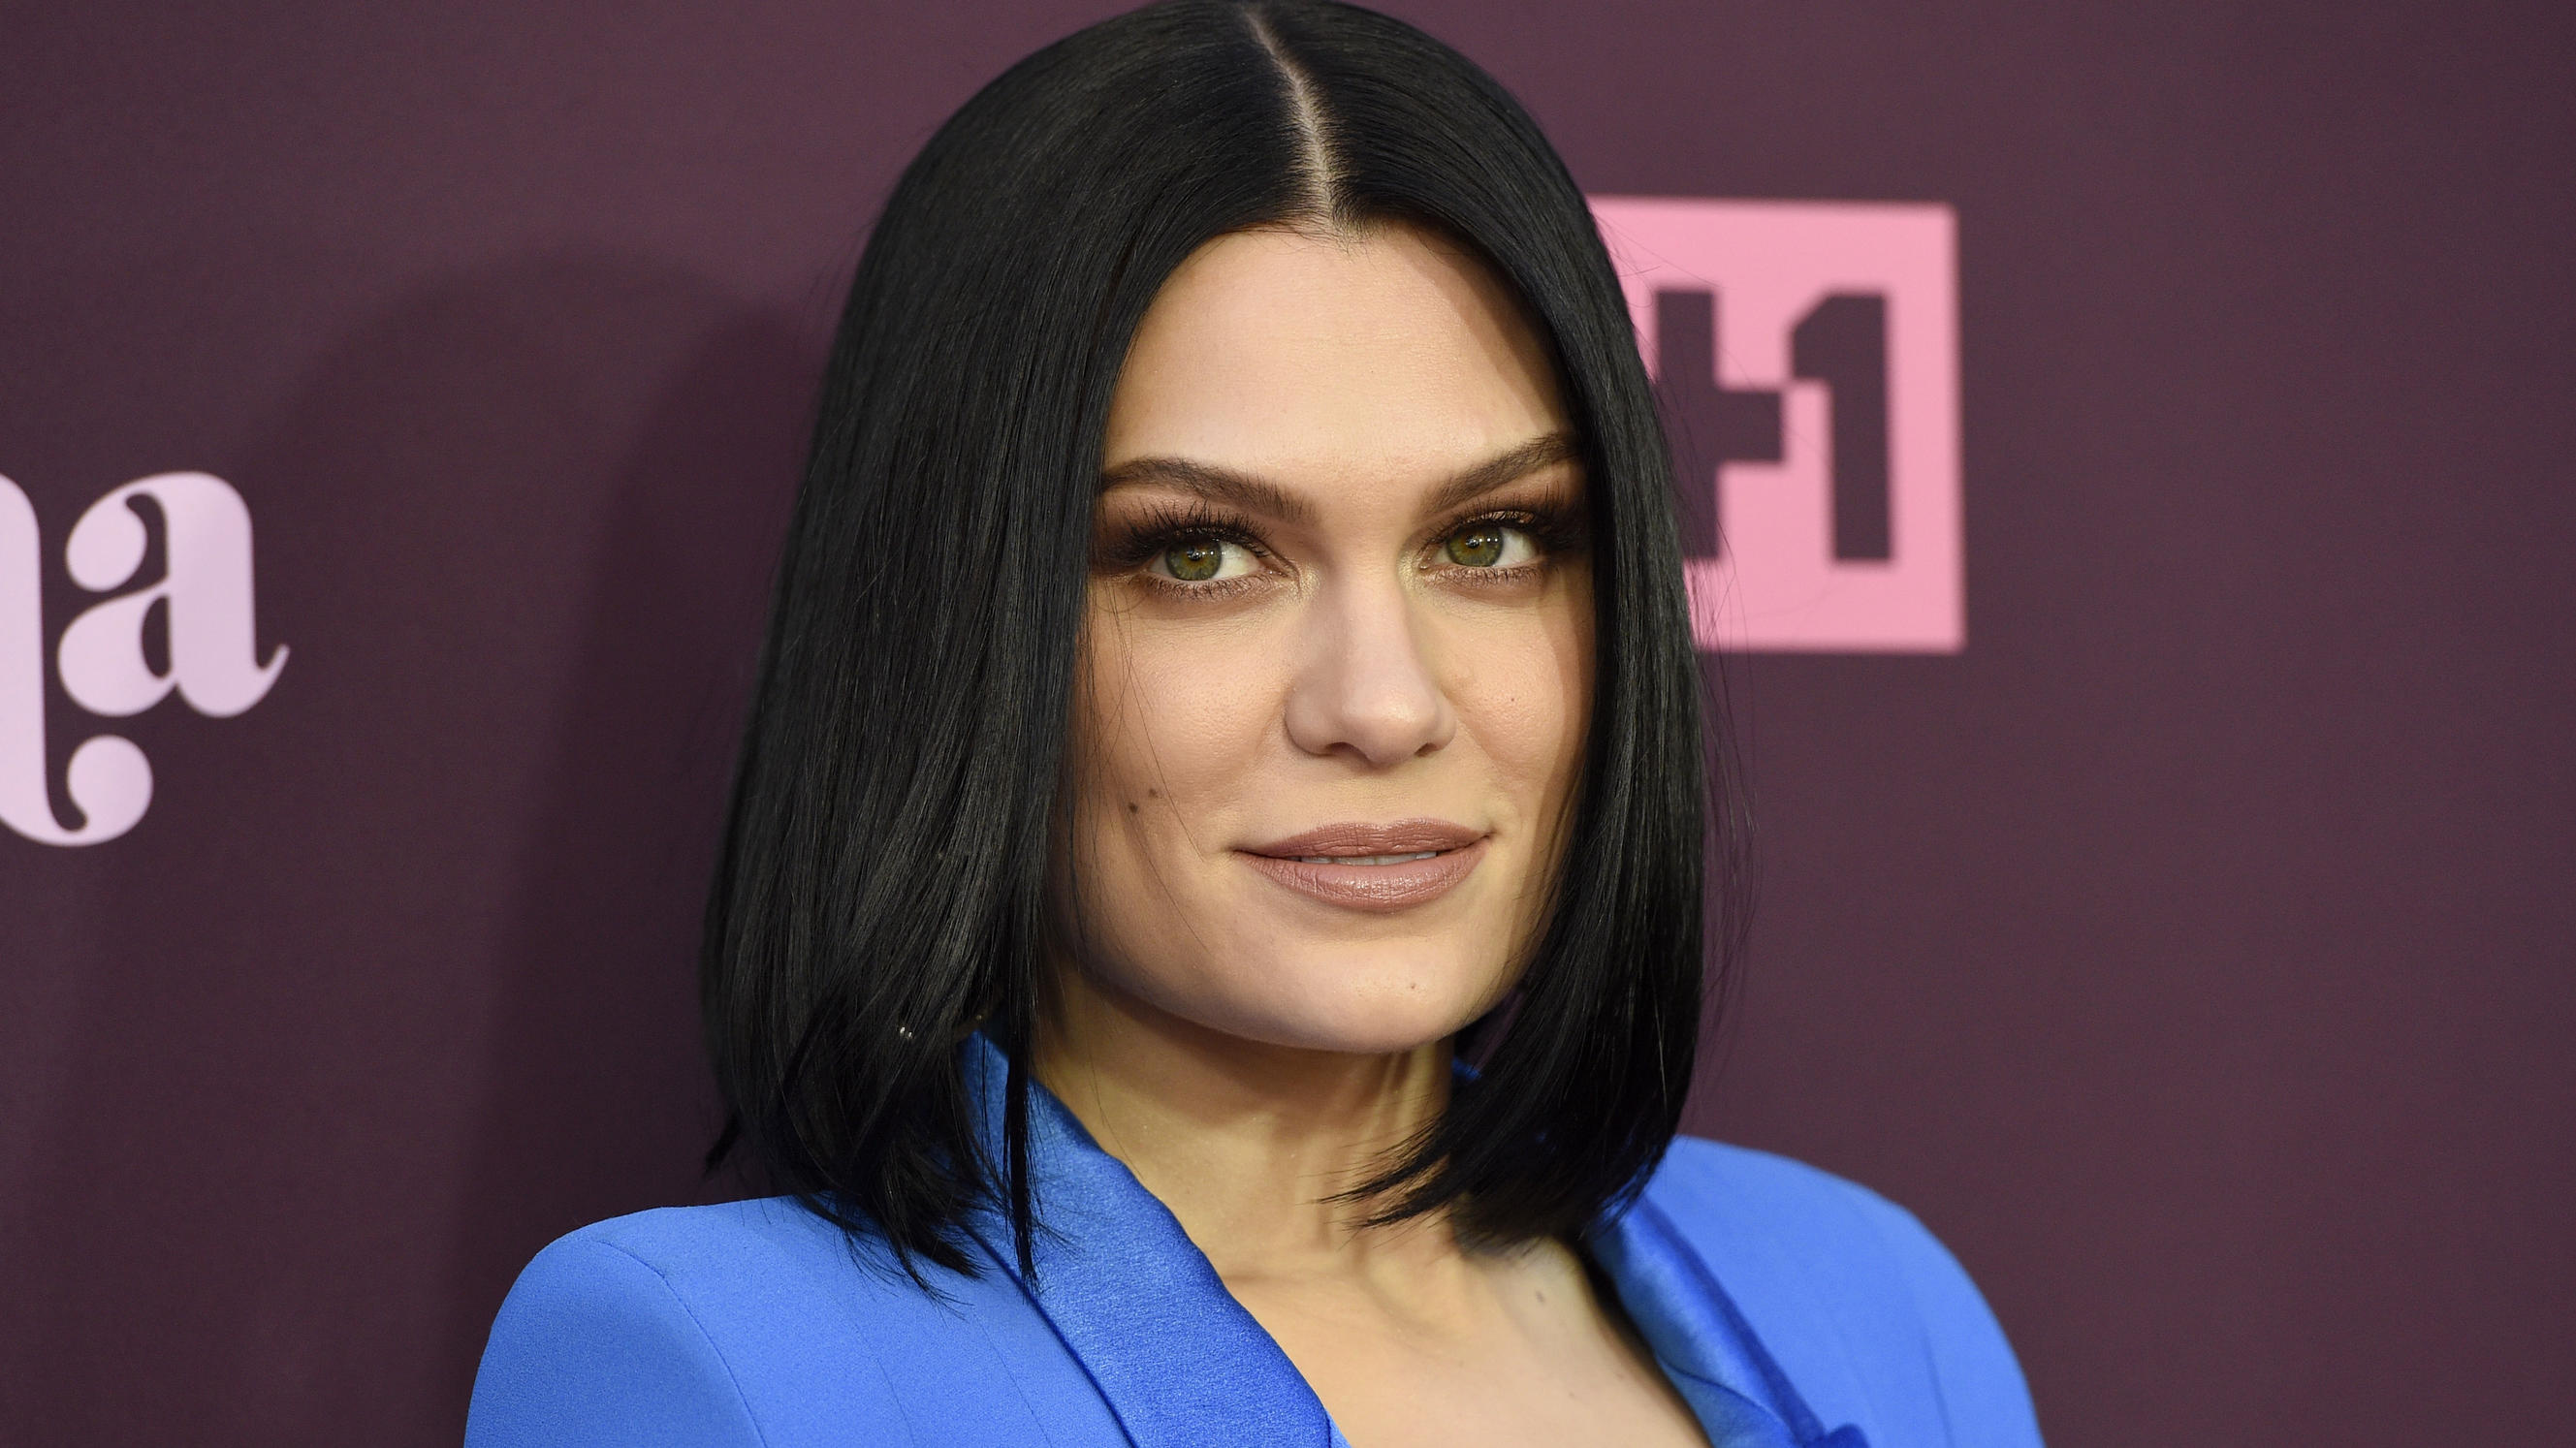 Jessie J Wallpapers (52+ images inside)